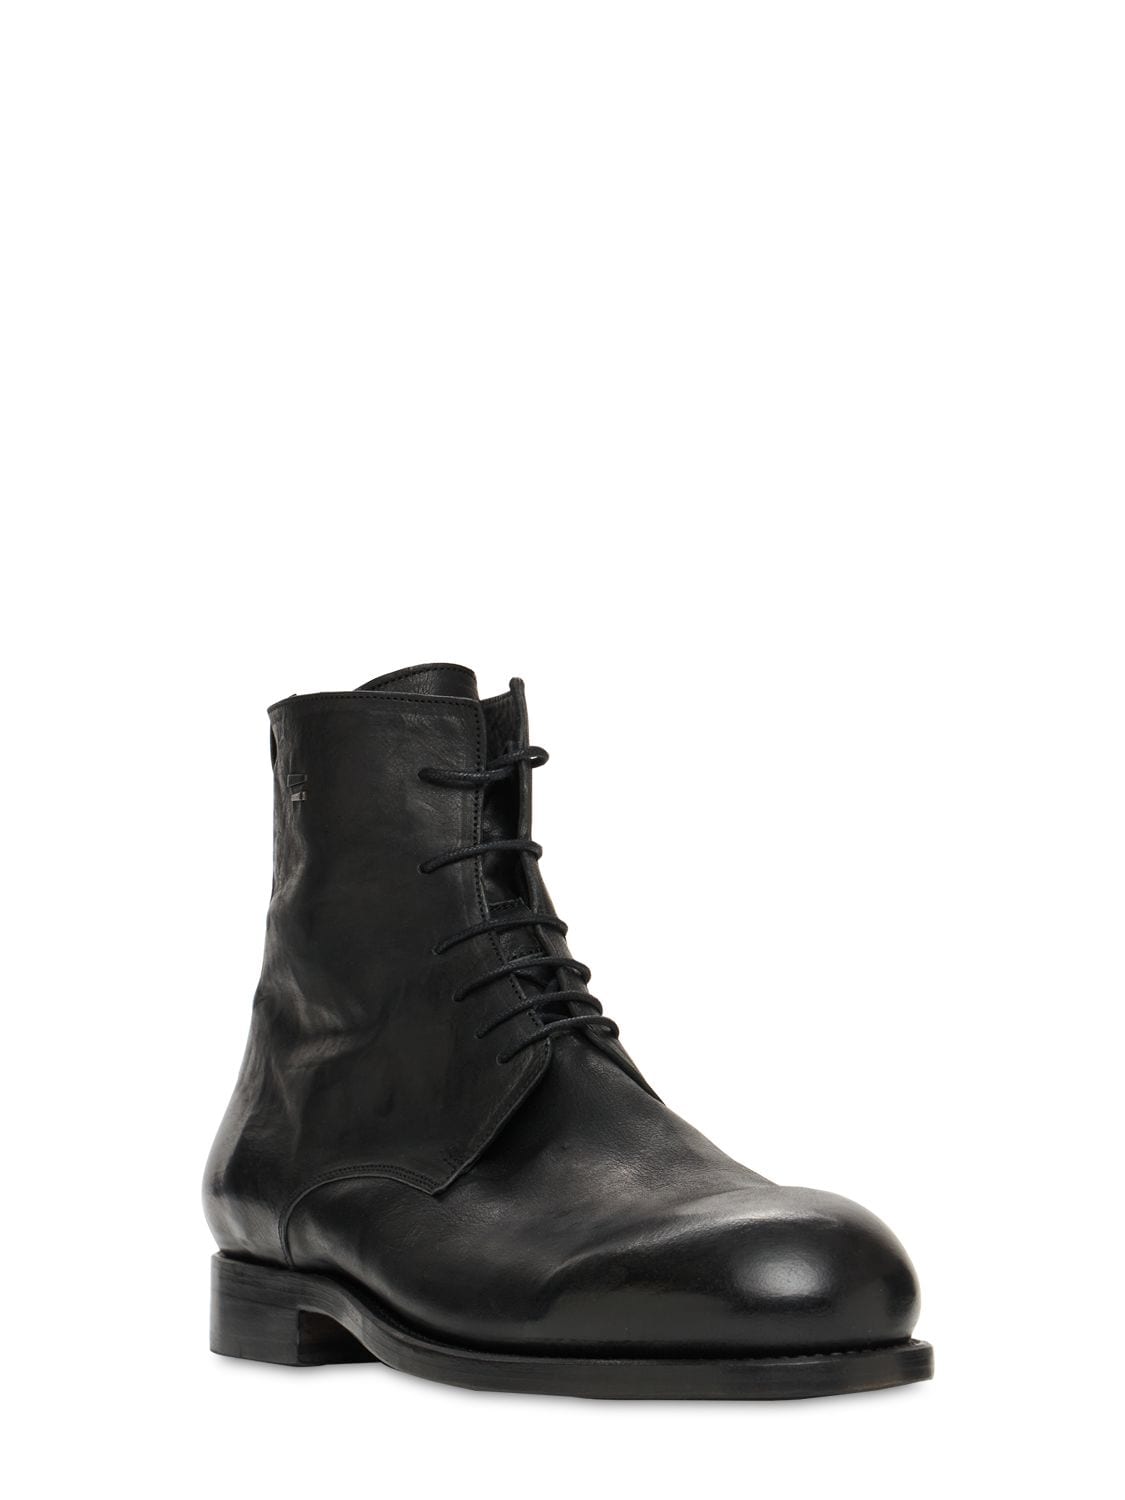 Stolthed vaskepulver Handel Shop The Last Conspiracy Leather Lace-up Boots In Black